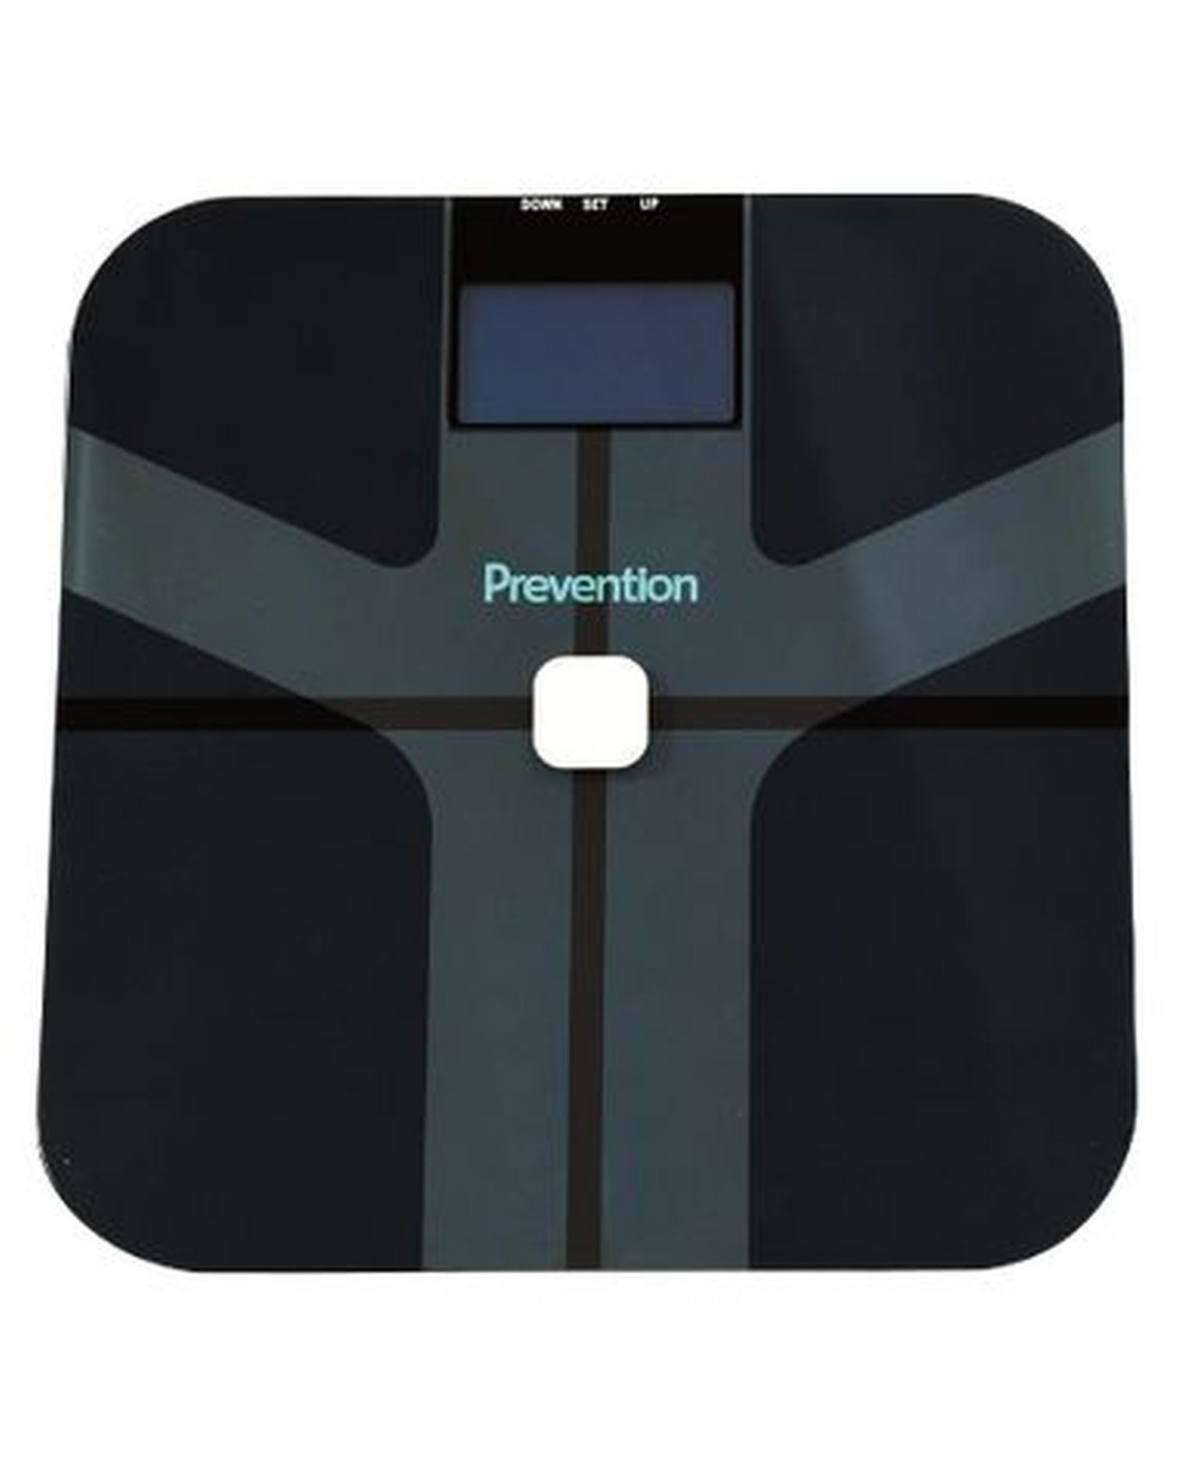 UPC 888115003013 product image for Prevention Bluetooth Registered Body Fat Weight Scale | upcitemdb.com